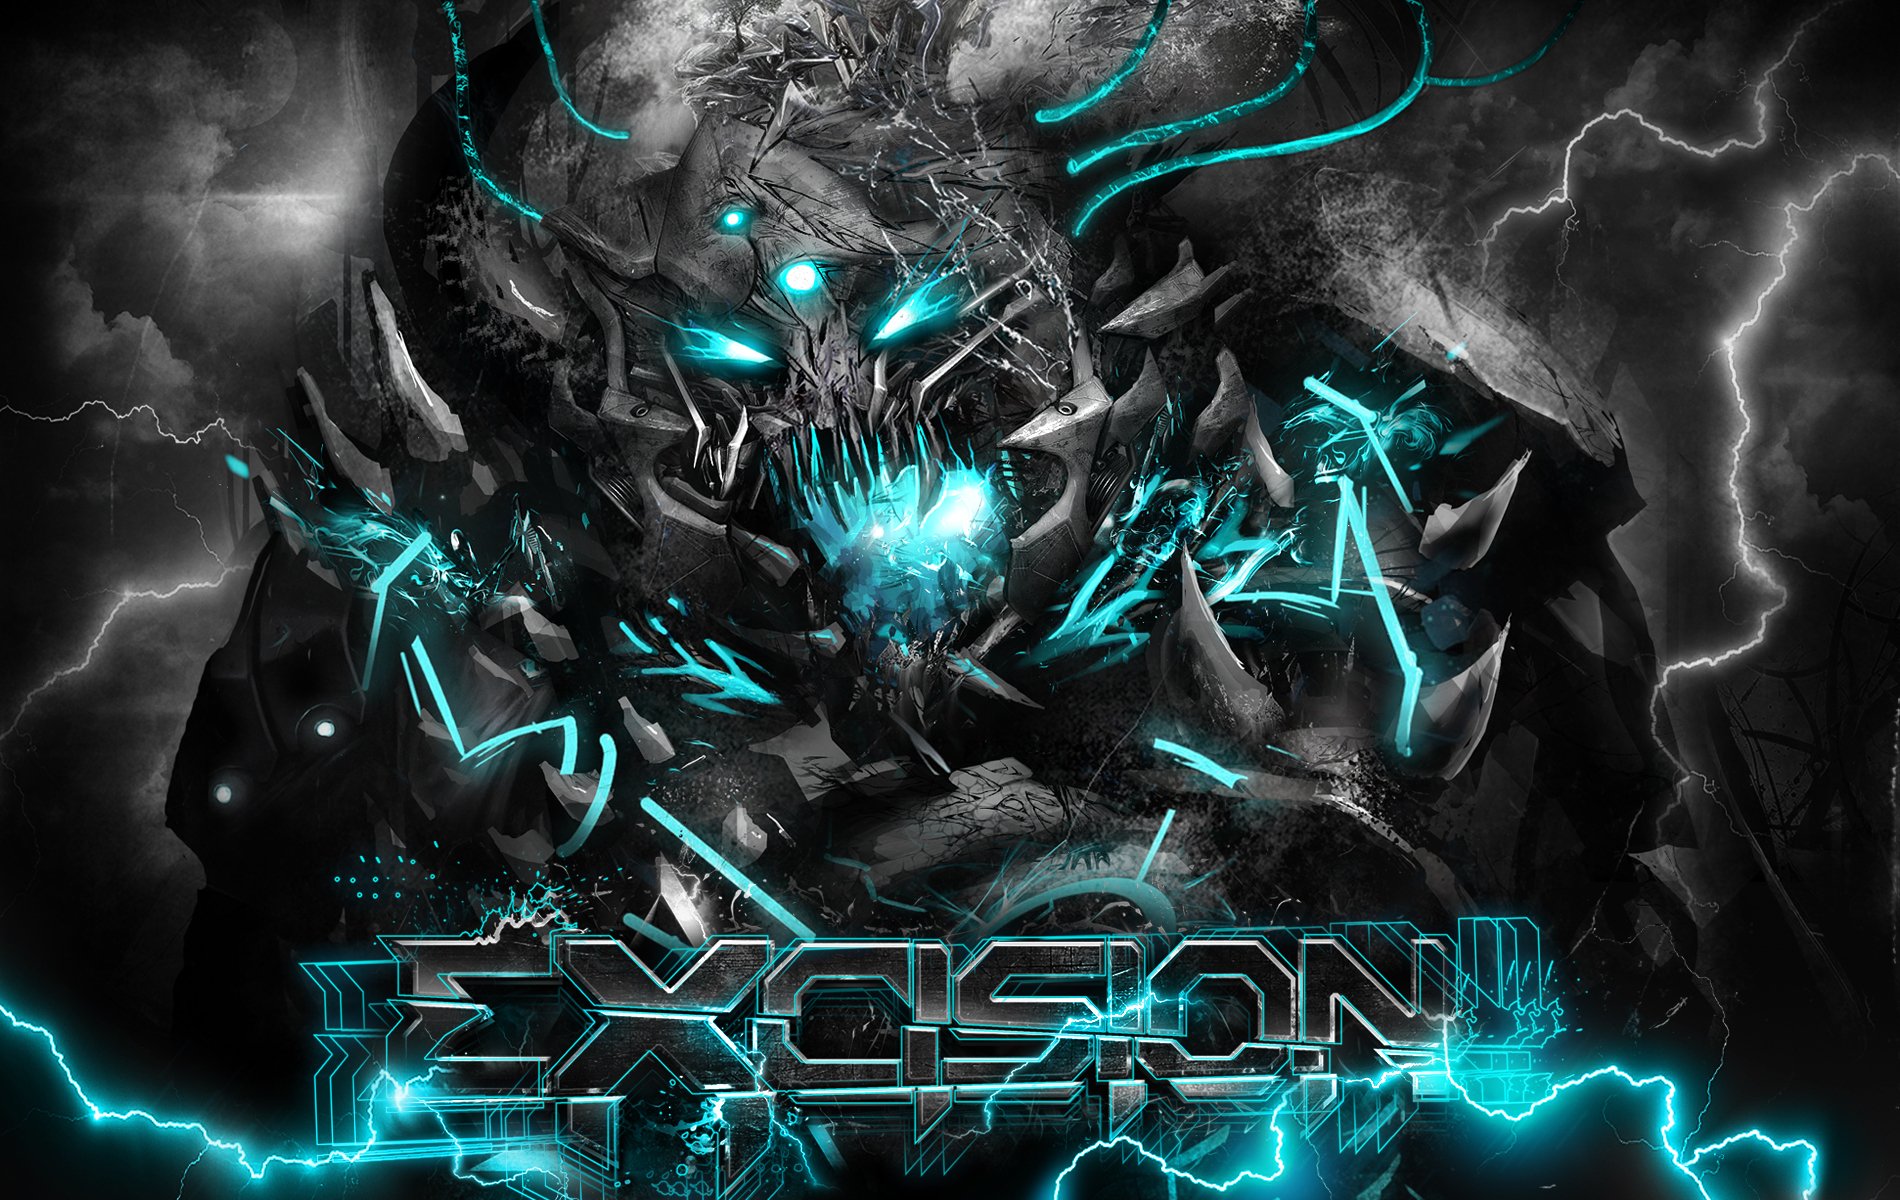 Wallpaper  excision DJ music festival electronic music lights  watermarked 2048x1390  Undefined987  2208647  HD Wallpapers  WallHere